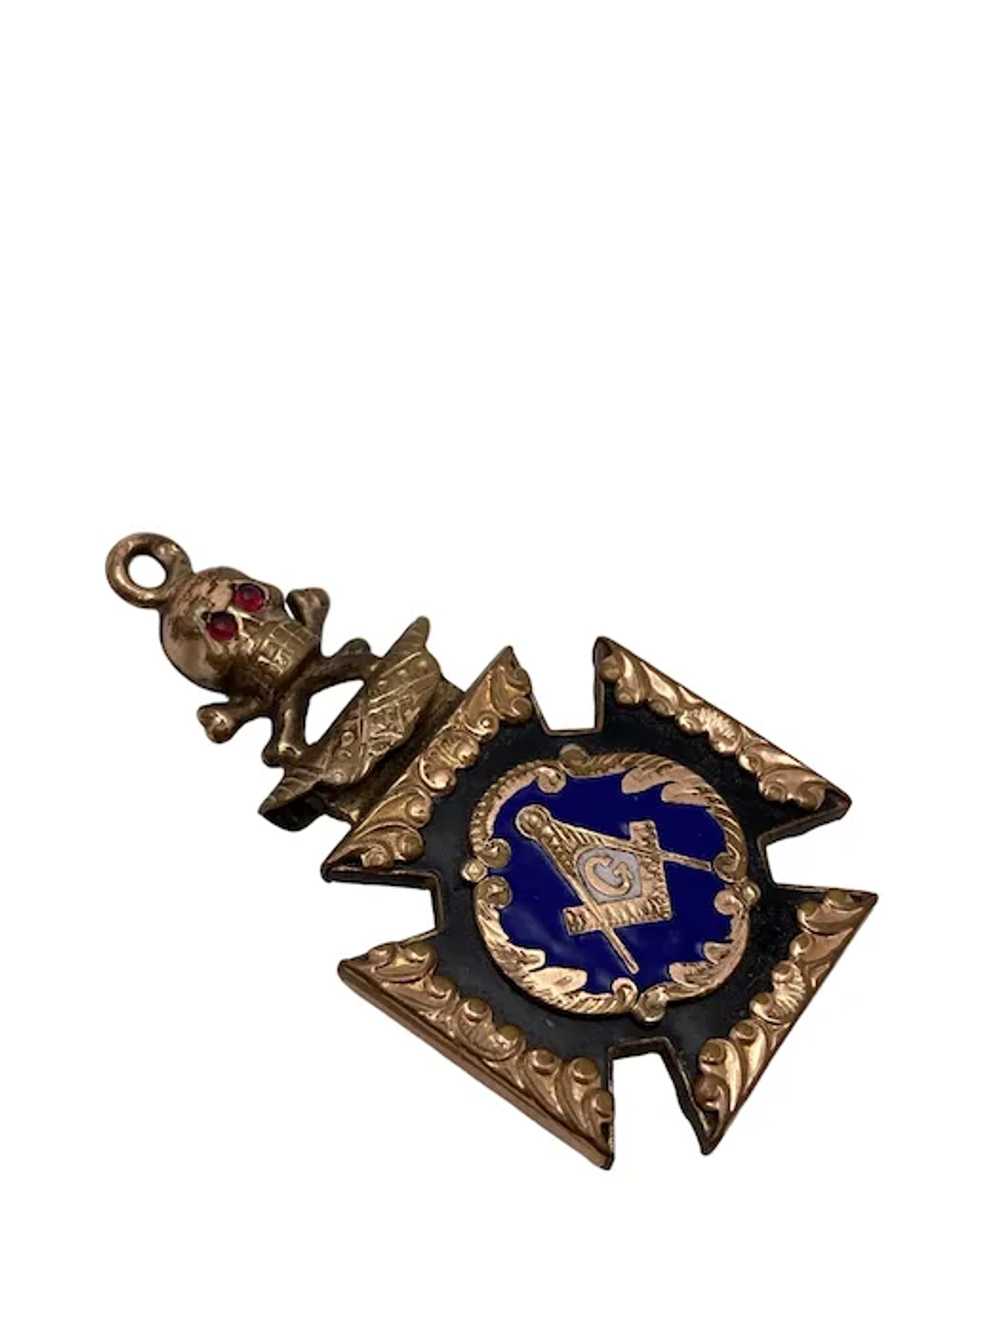 Antique Gold Filled and Enamel Masonic Fob or Cha… - image 3